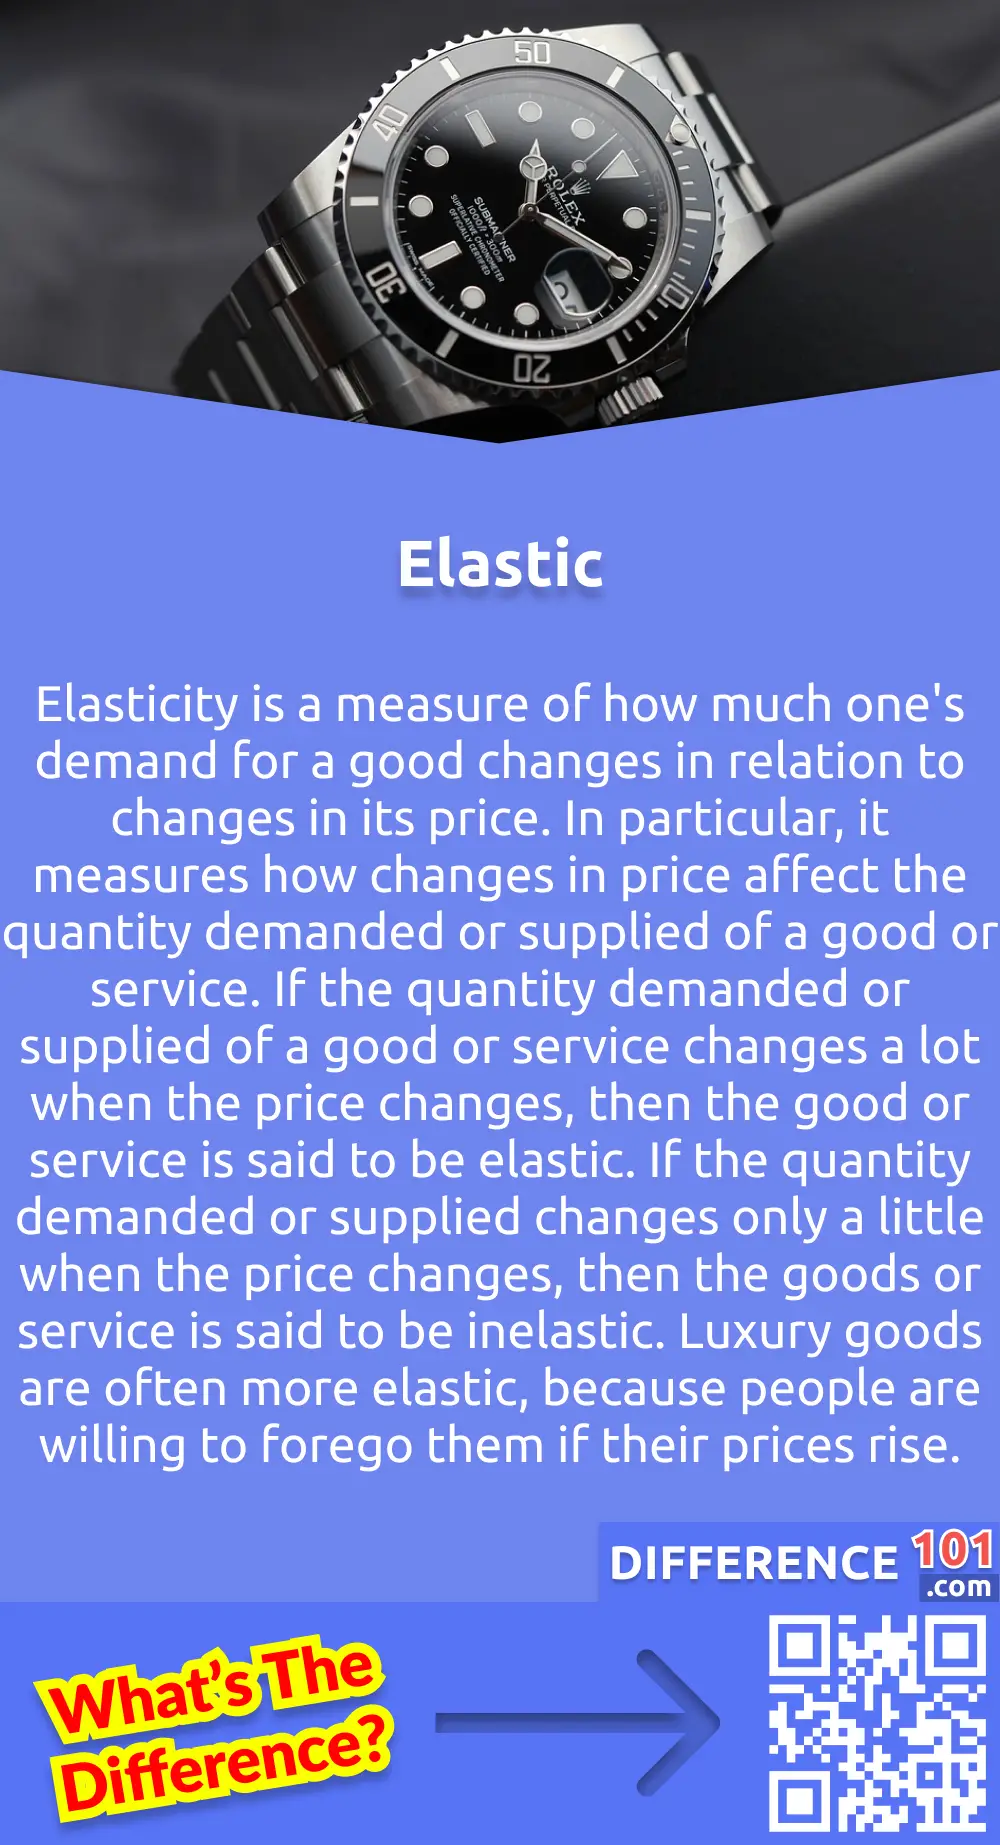 What Is Elastic? Elasticity is a measure of how much one's demand for a good changes in relation to changes in its price. In particular, it measures how changes in price affect the quantity demanded or supplied of a good or service. If the quantity demanded or supplied of a good or service changes a lot when the price changes, then the good or service is said to be elastic. If the quantity demanded or supplied changes only a little when the price changes, then the goods or service is said to be inelastic. Luxury goods are often more elastic, because people are willing to forego them if their prices rise.  